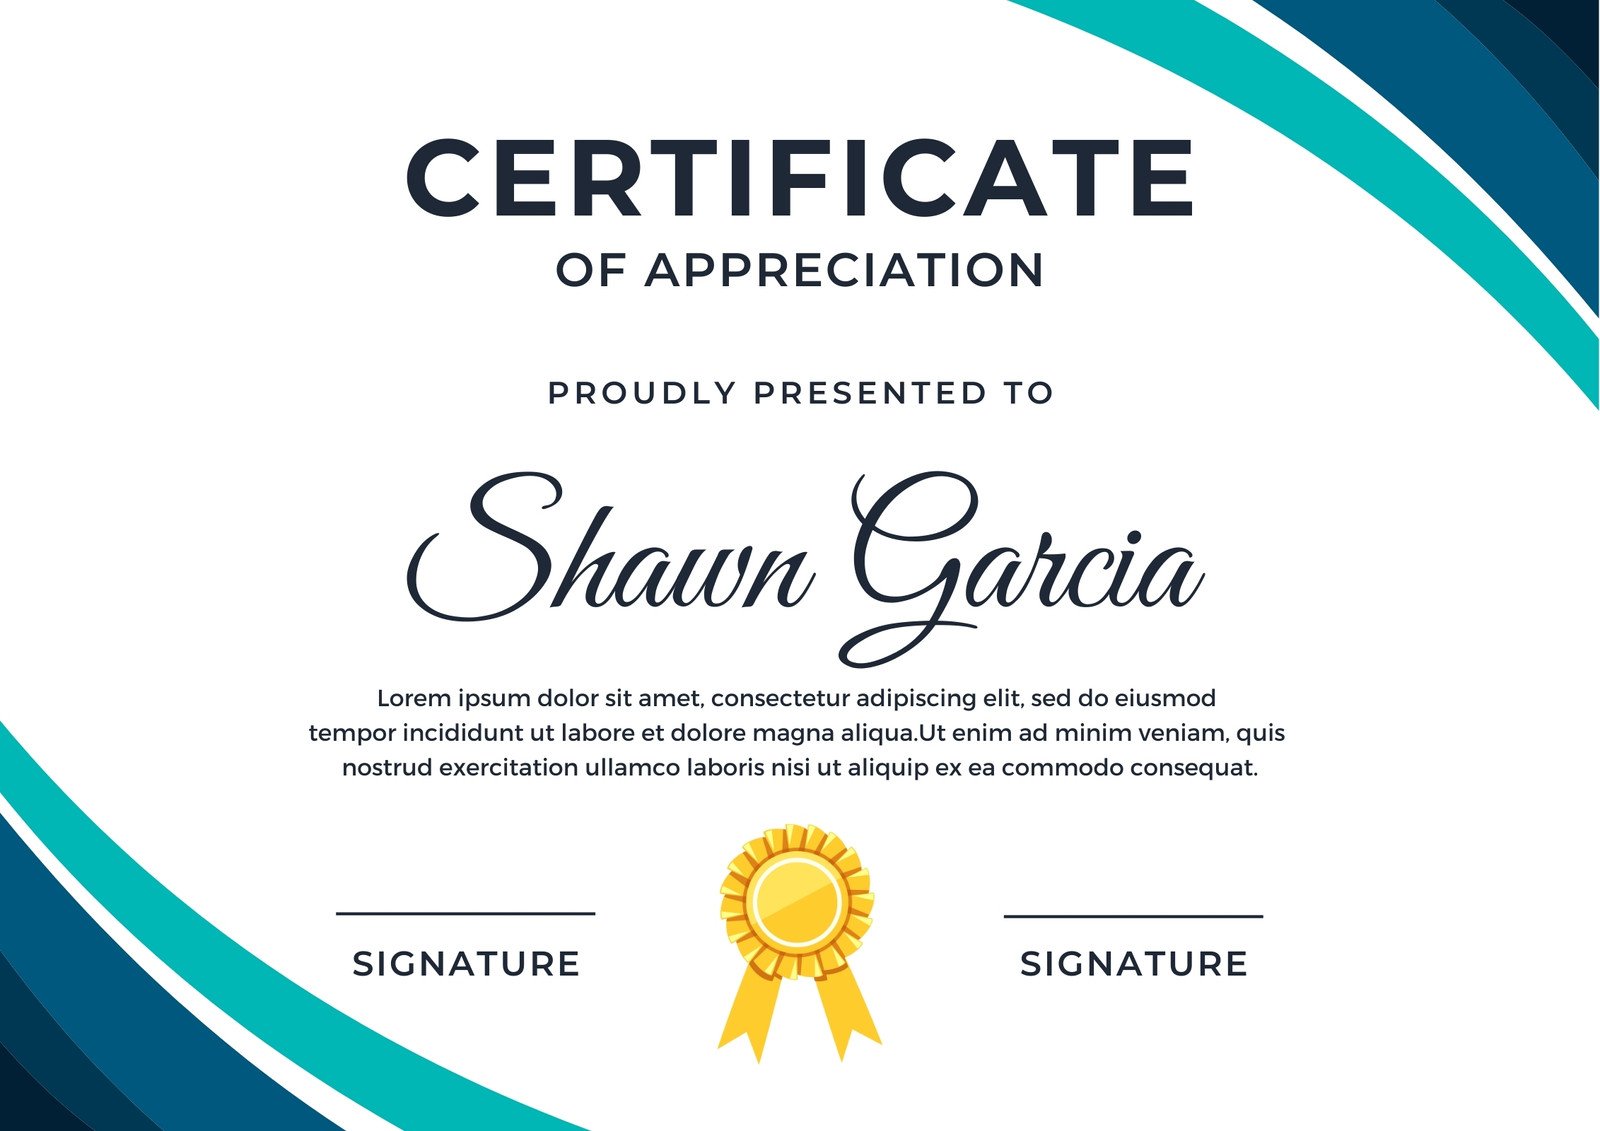 certificate of completion template blue